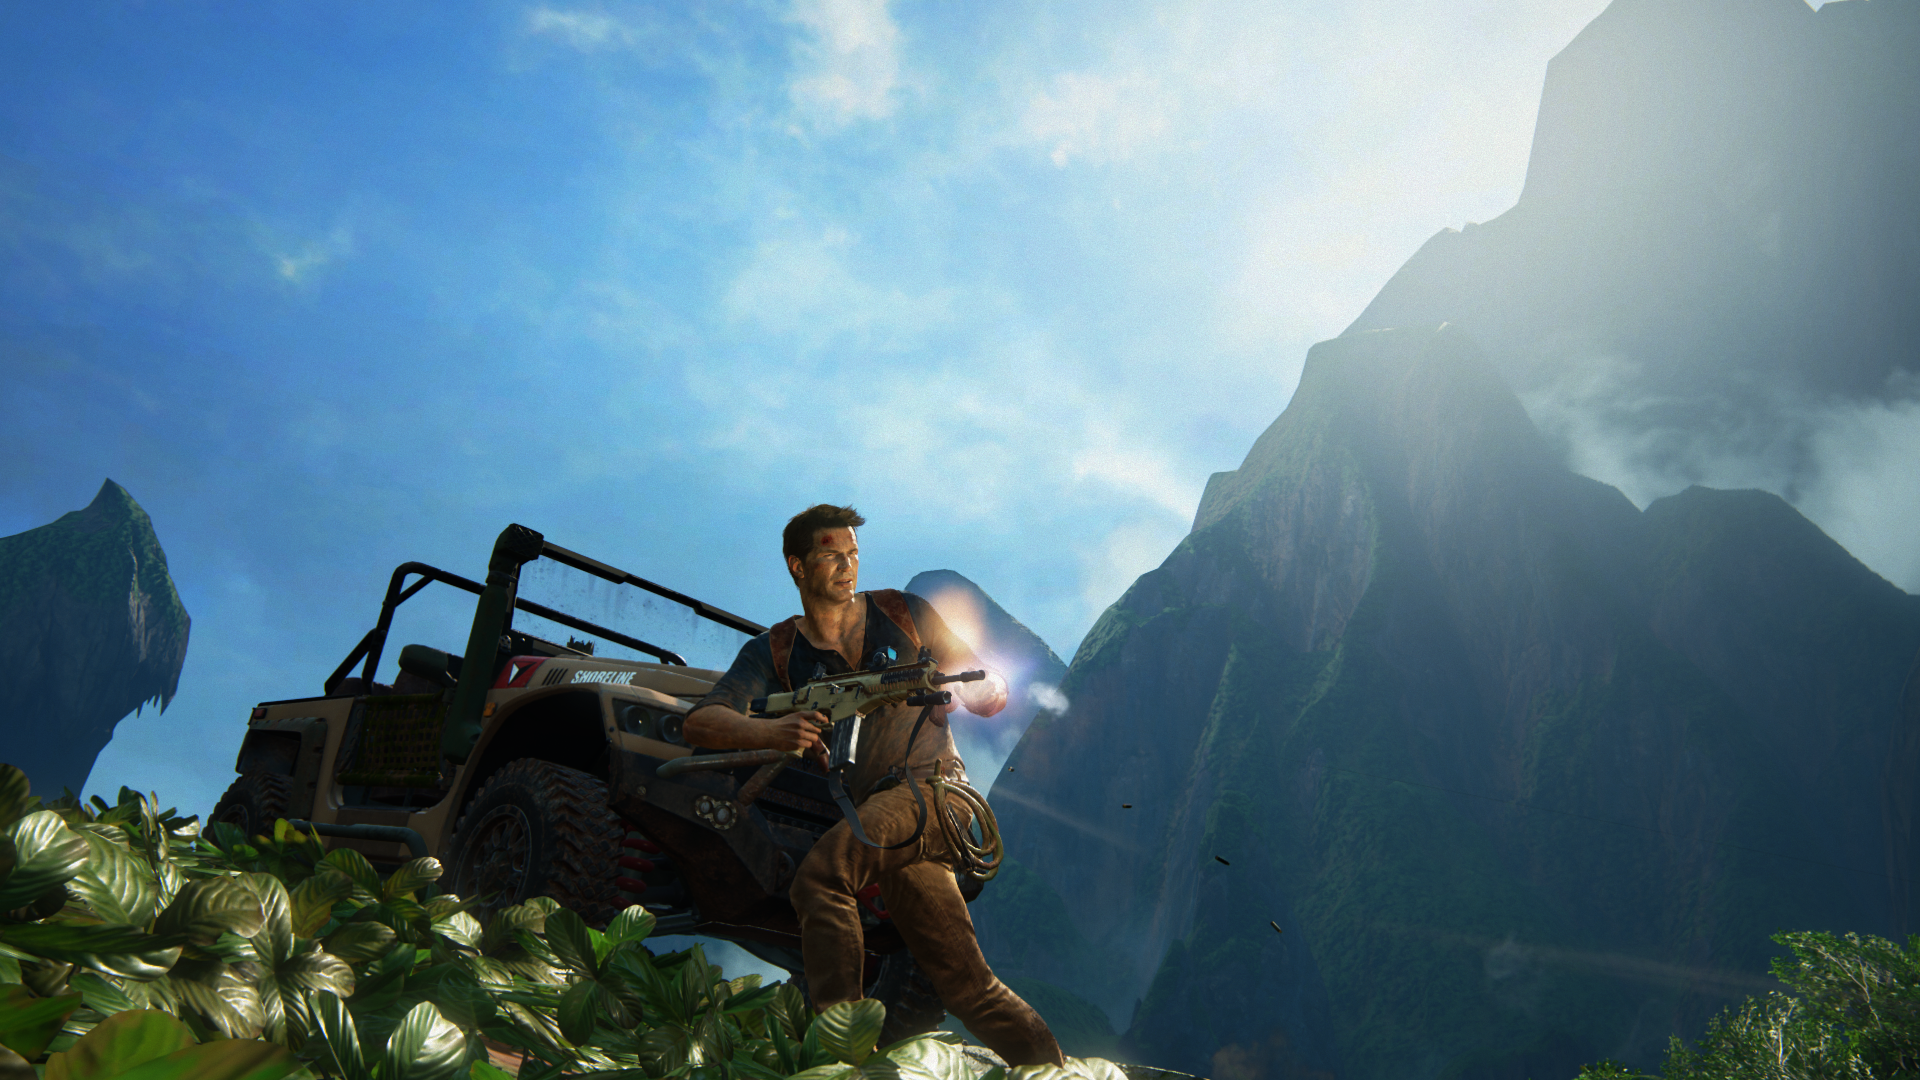 d77Uncharted4AThiefsEnd.png